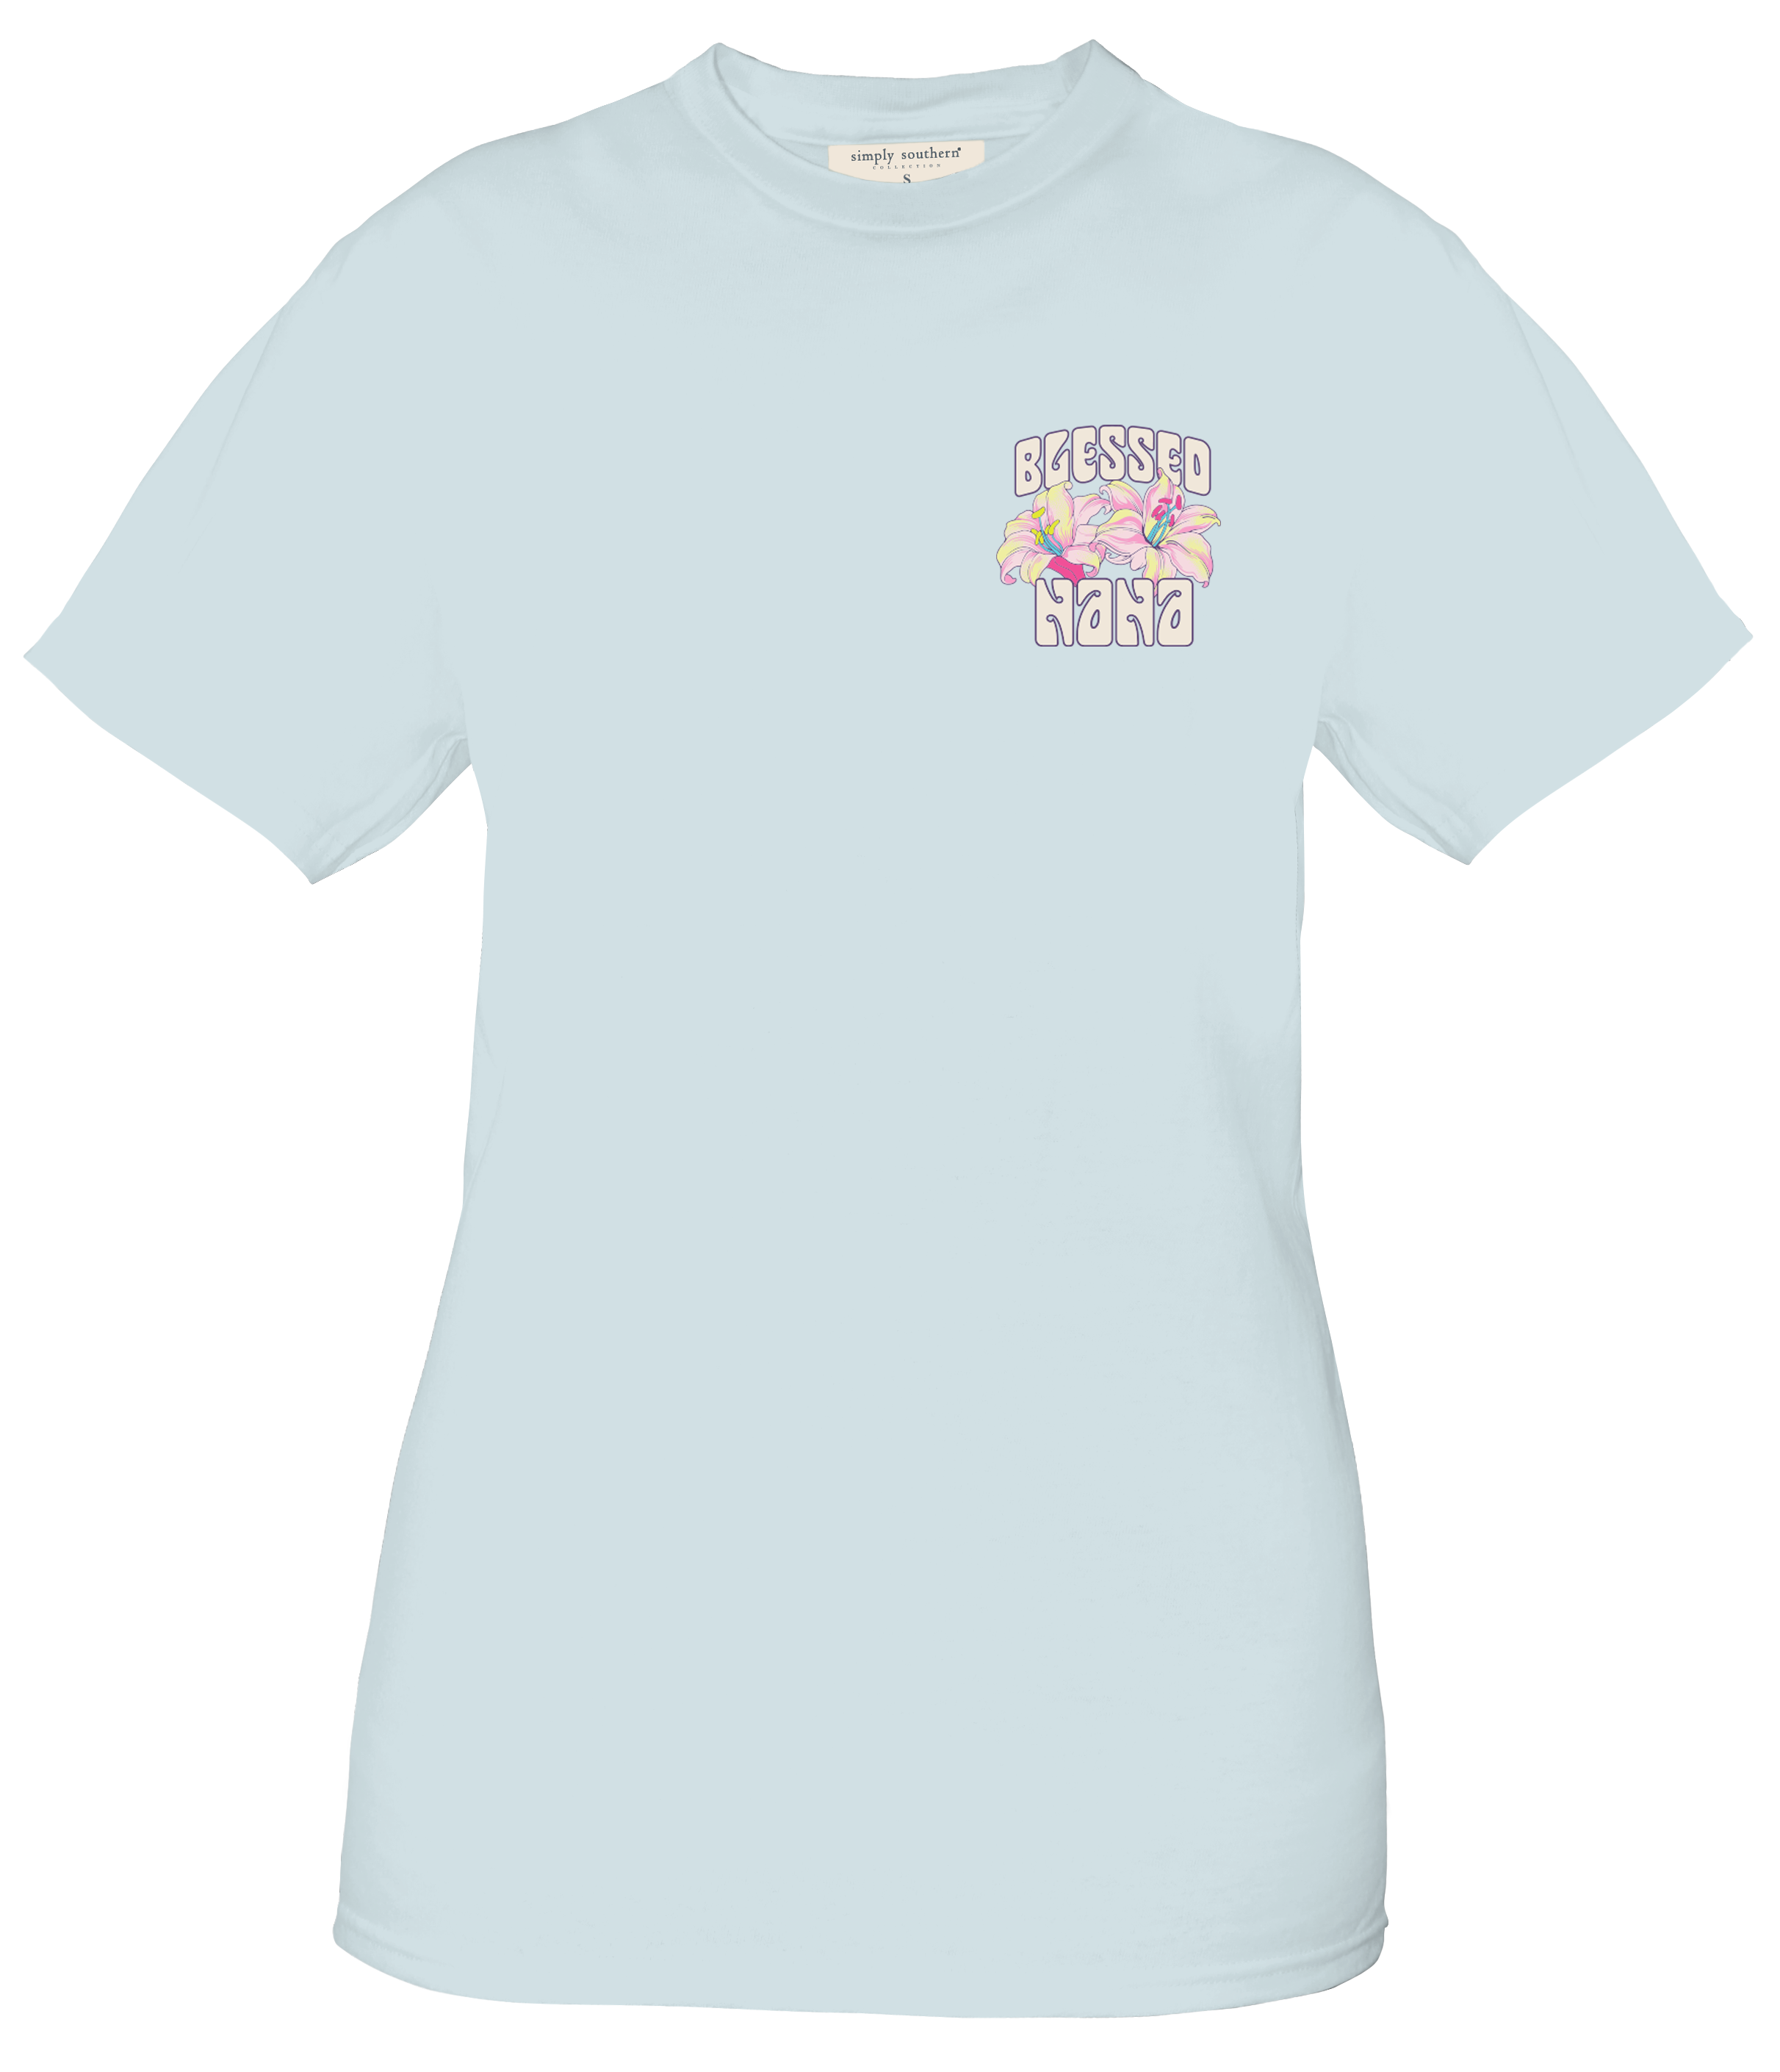 'Blessed Nana' Butterfly Short Sleeve Tee by Simply Southern